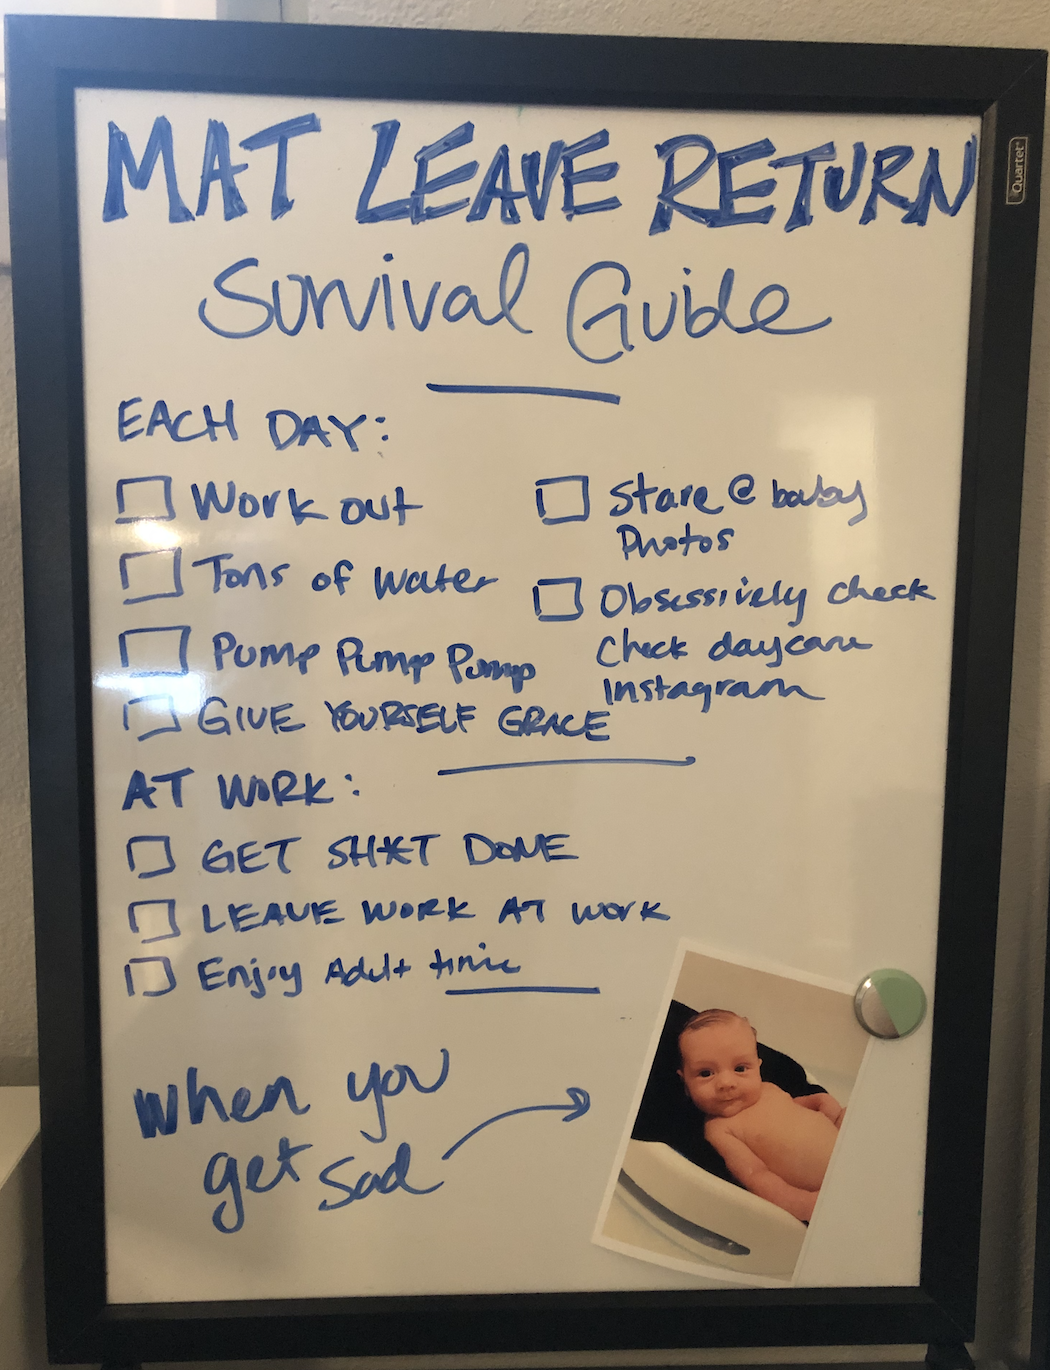 I put my plan on a white board. It helps.